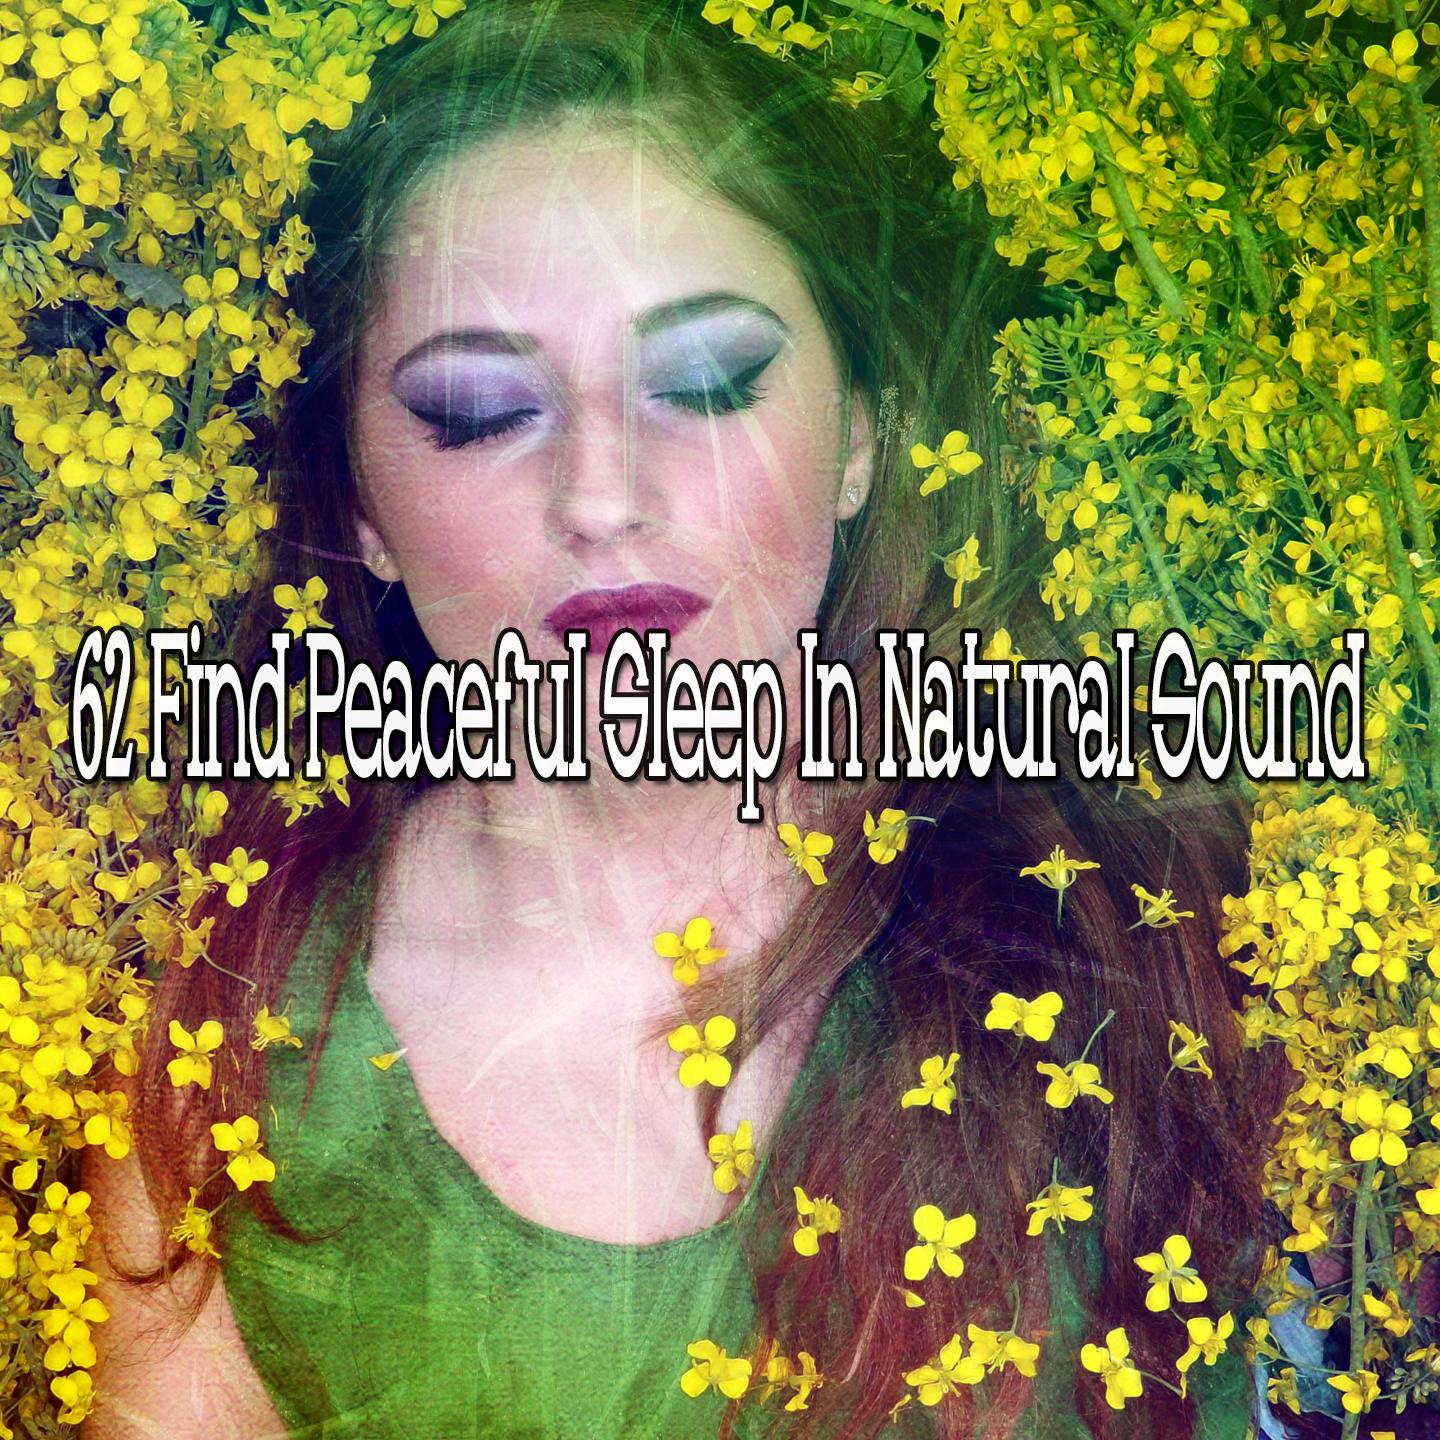 62 Find Peaceful Sleep in Natural Sound